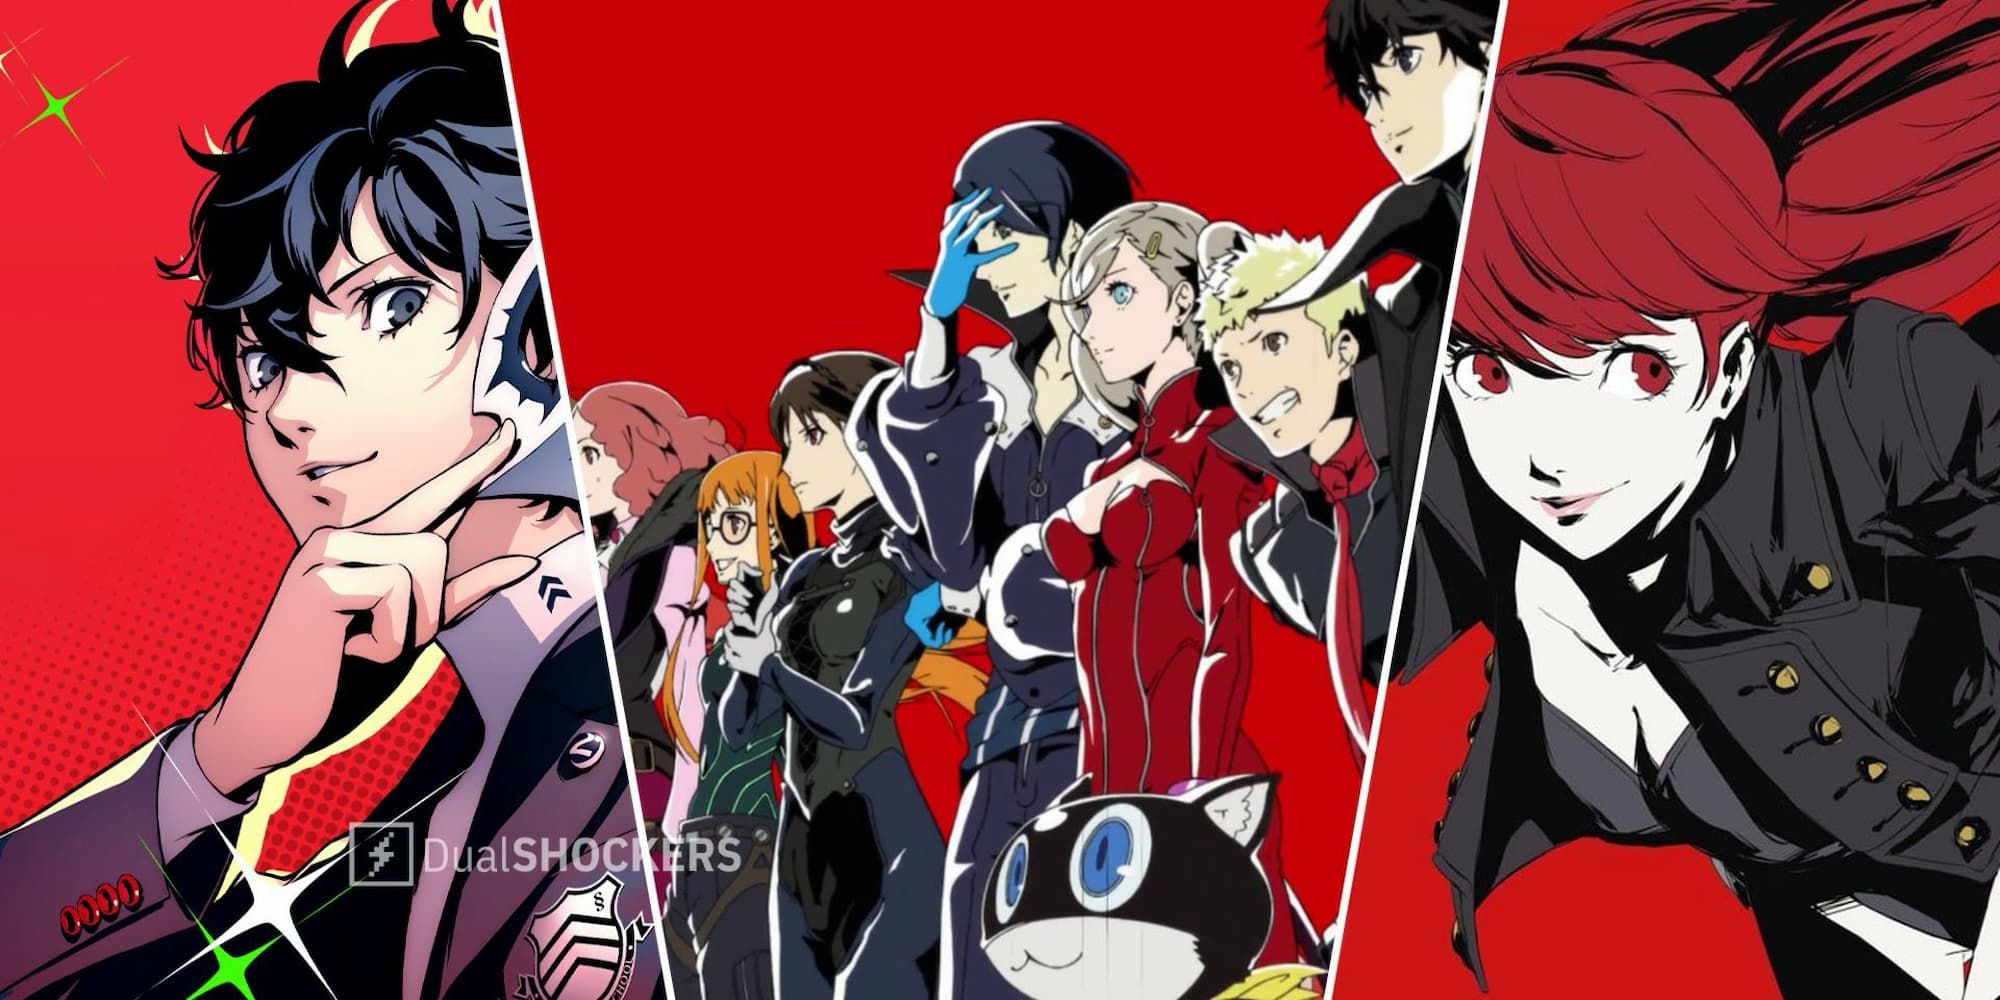 Persona 5 Royal: How Long to Beat